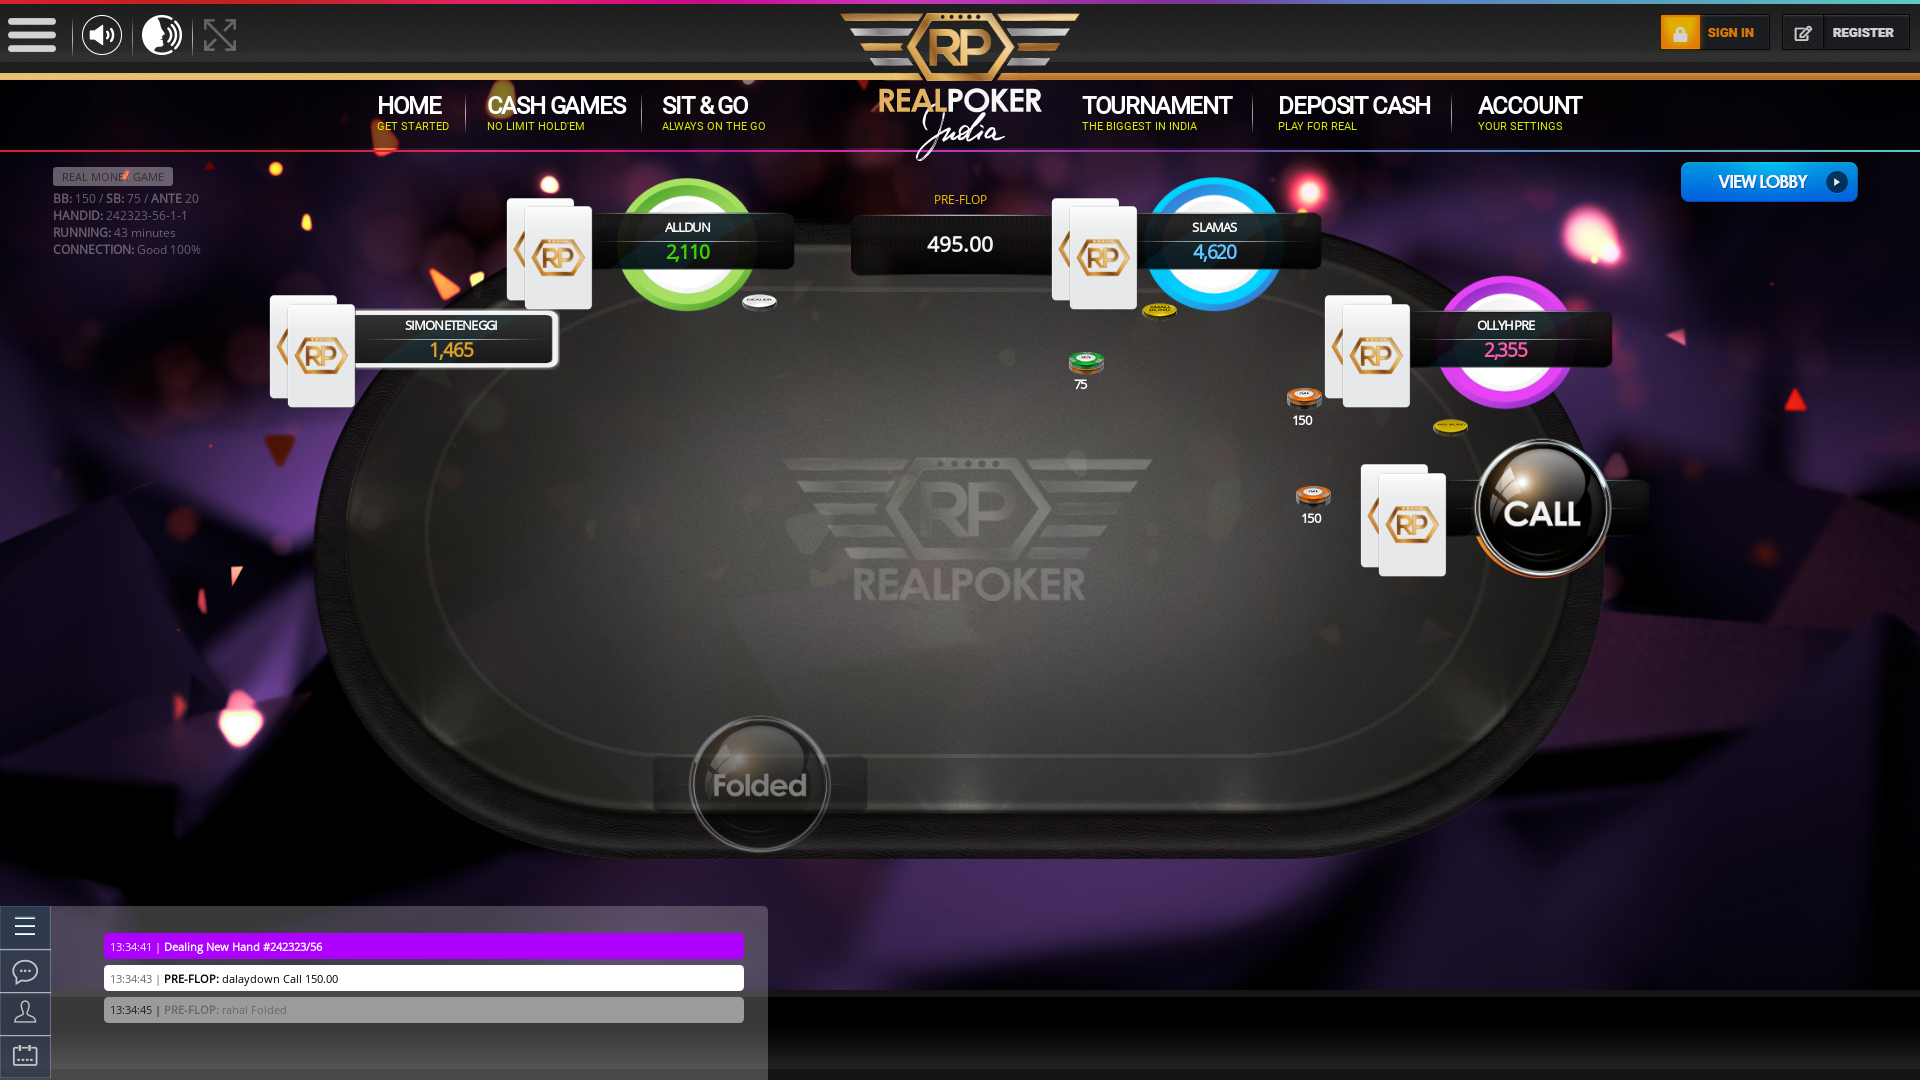 Real poker 10 player table in the 42nd minute